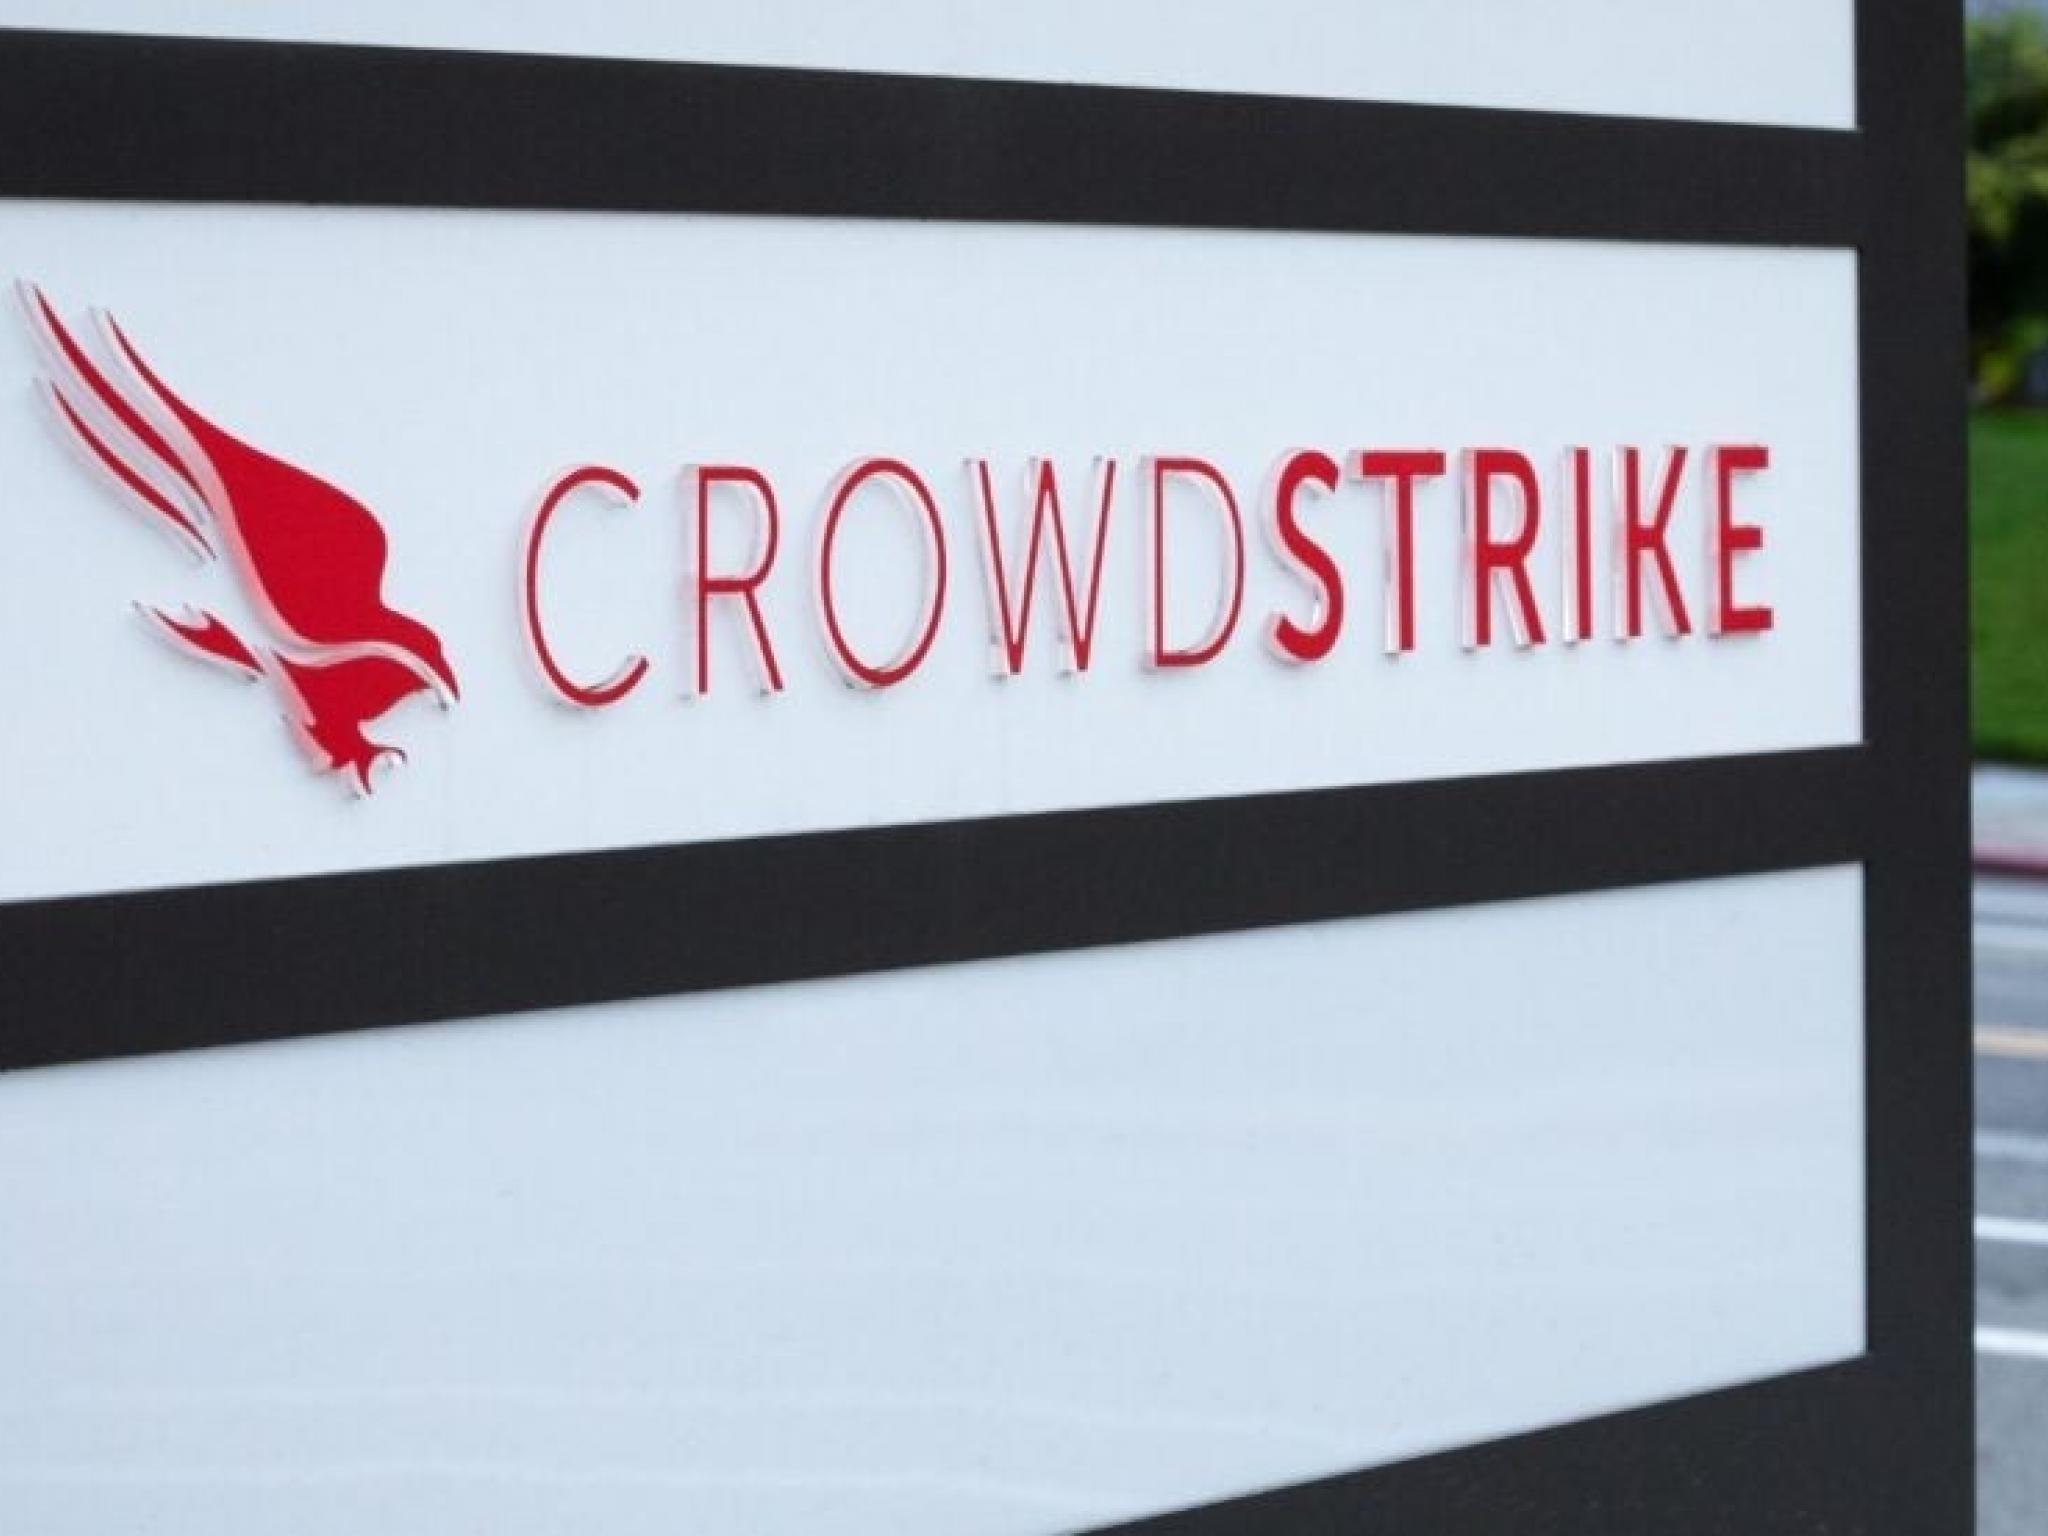  delta-will-have-to-explain-why-it-didnt-take-responsibility--security-companys-lawyers-fireback-at-tech-crash-hit-airline-after-it-threatens-to-sue-microsoft-and-crowdstrike 